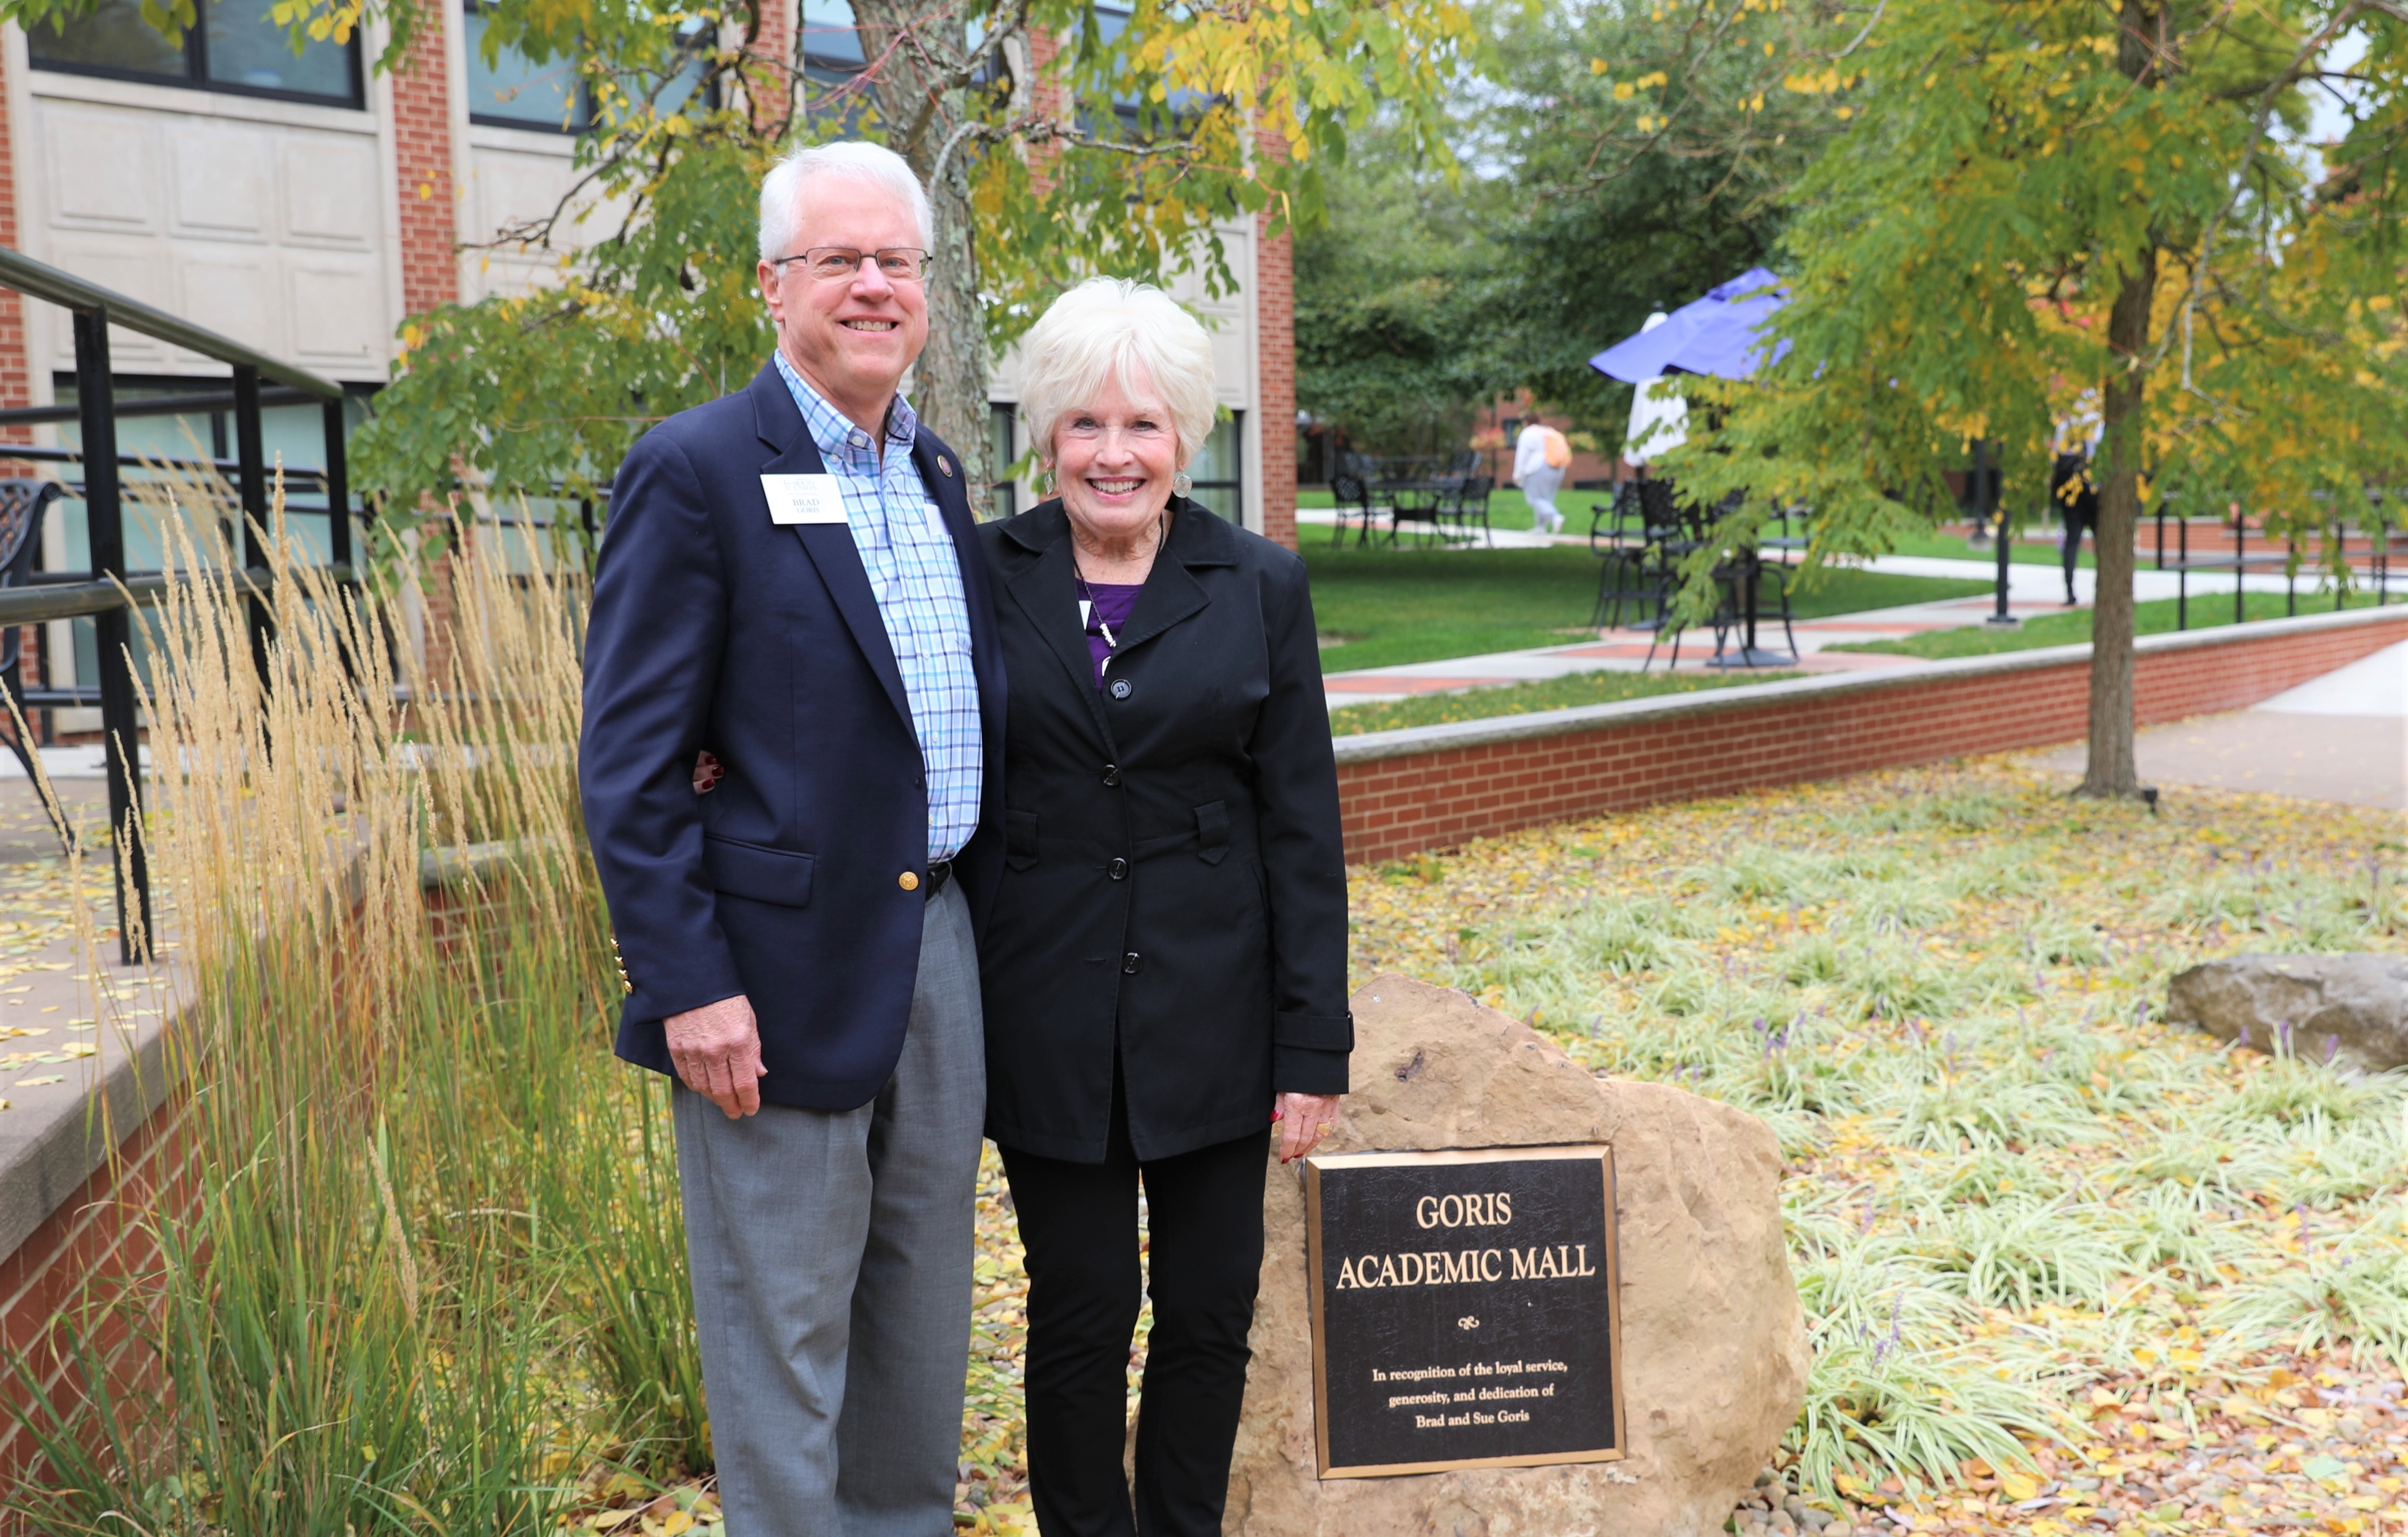 Alliance Leaders Brad and Sue Goris Honored at Mount Union